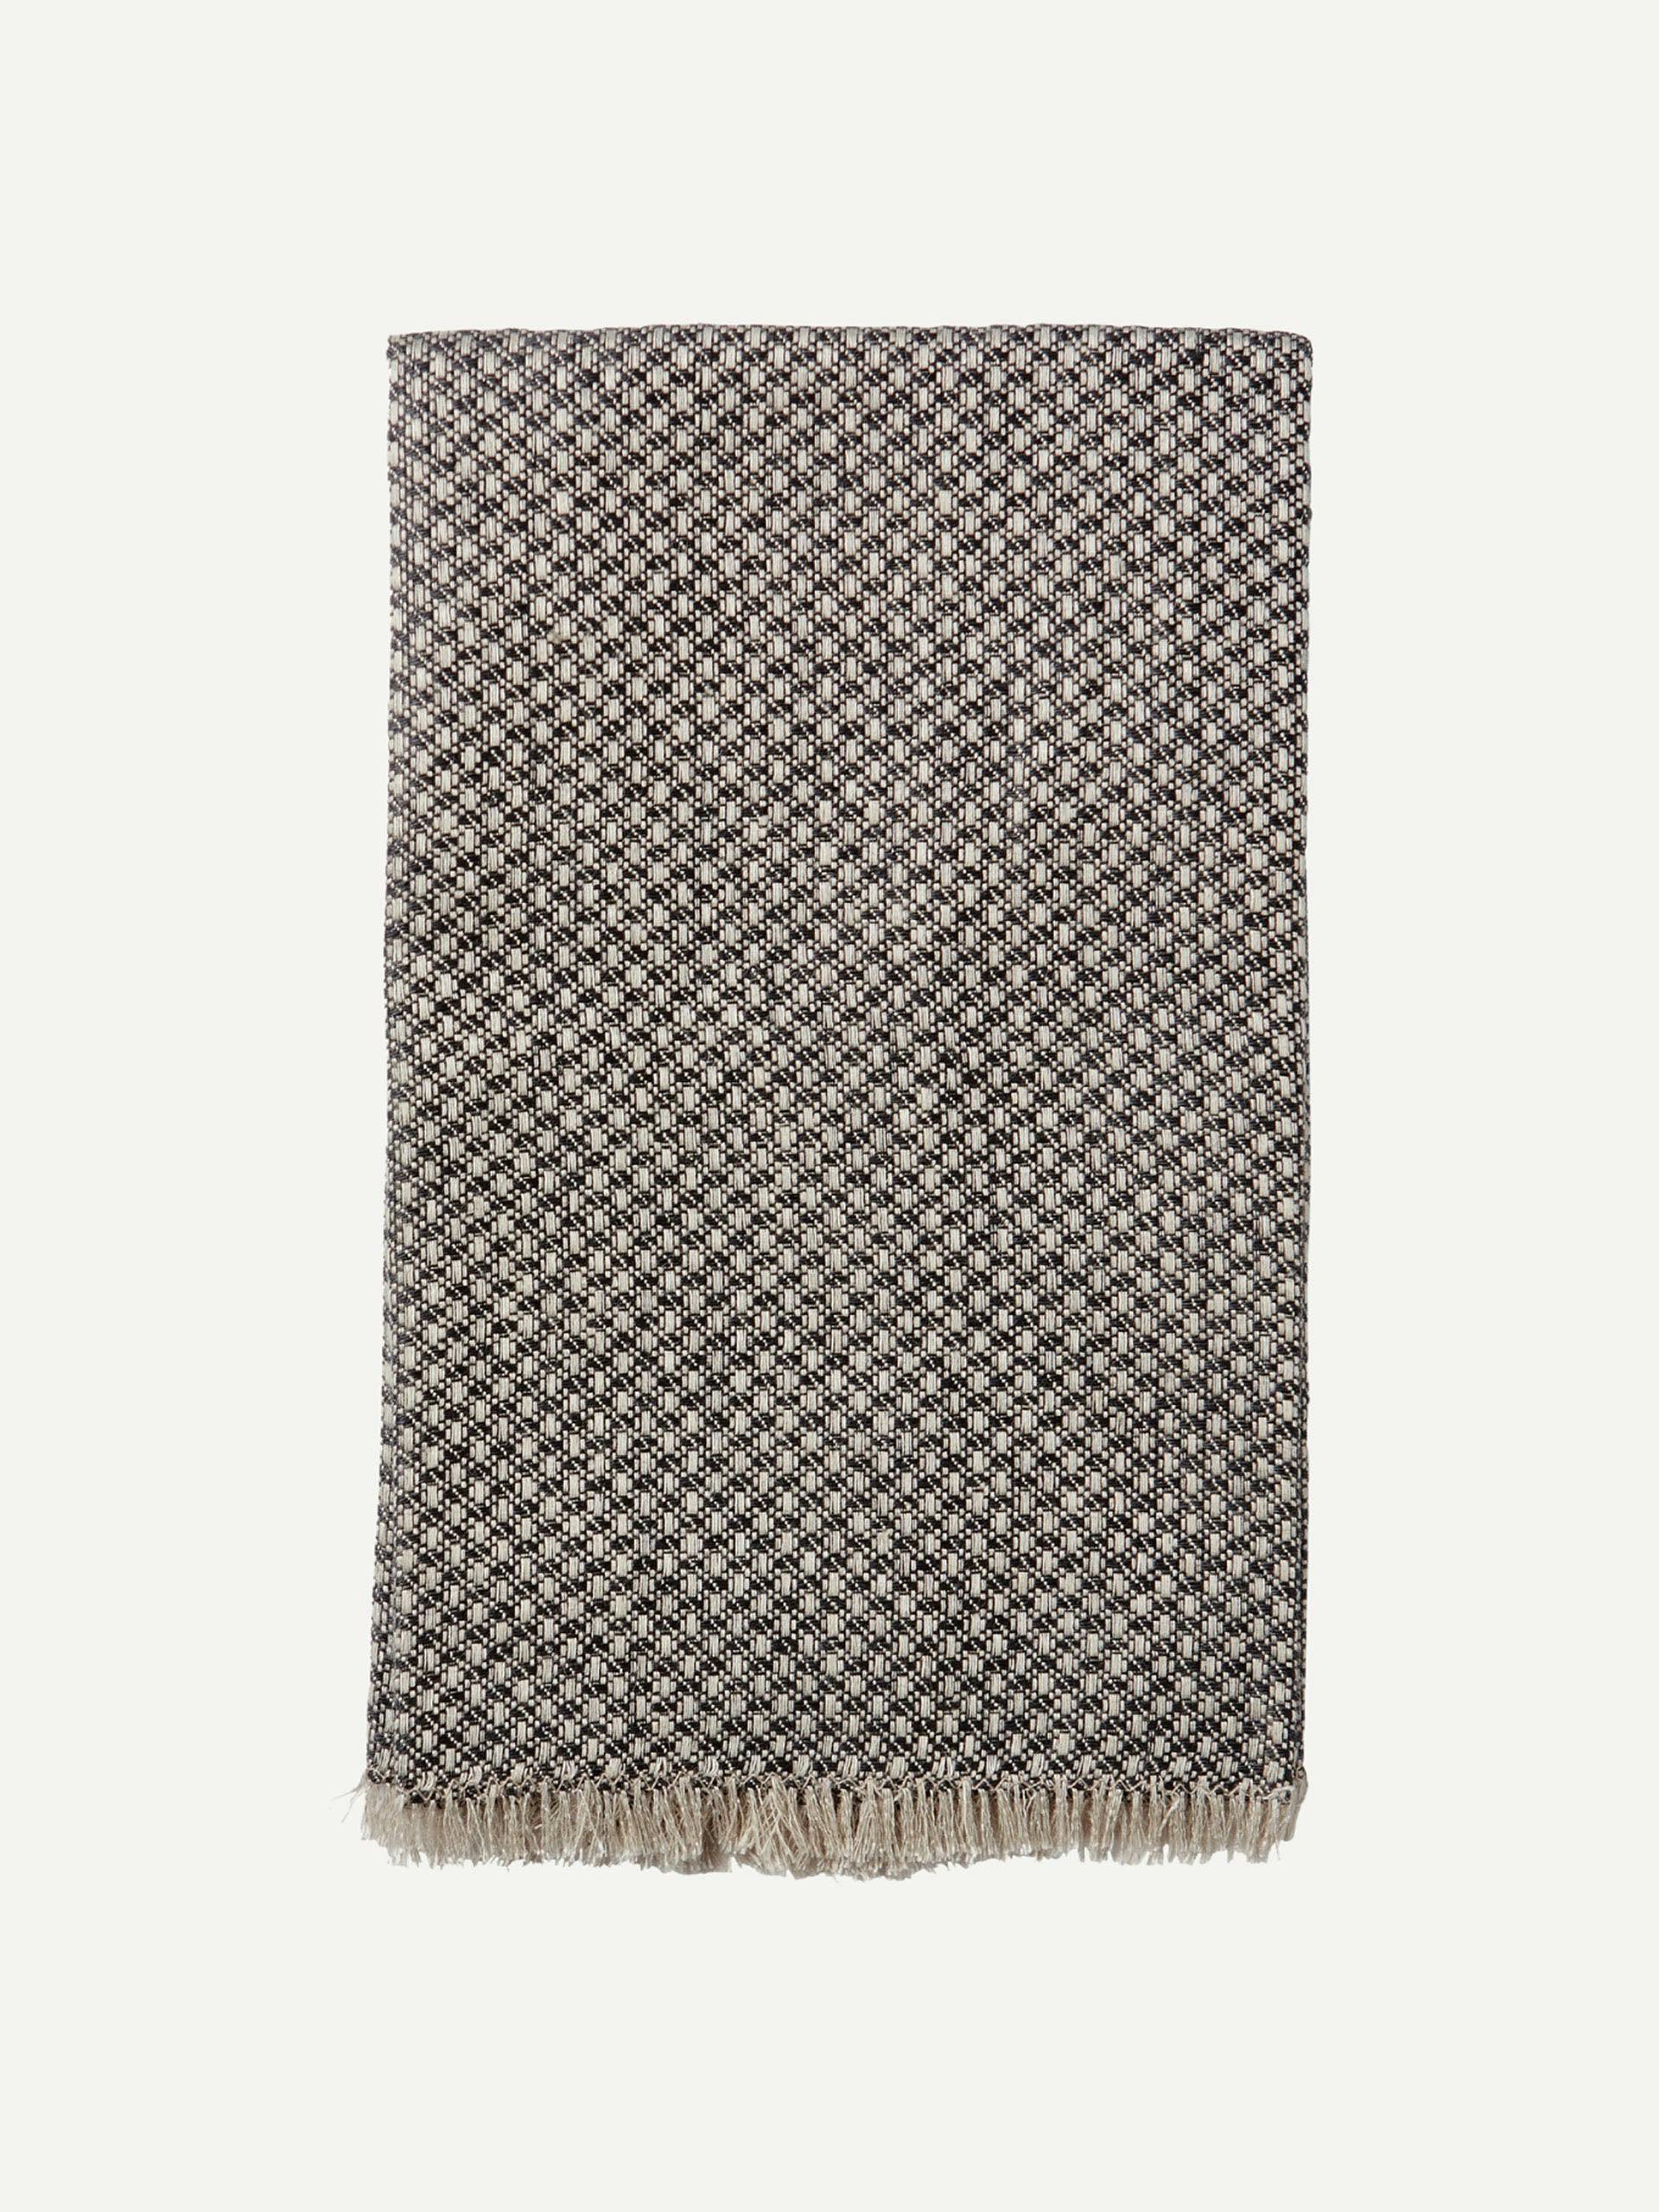 Woven black/taupe Italian linen guest towel